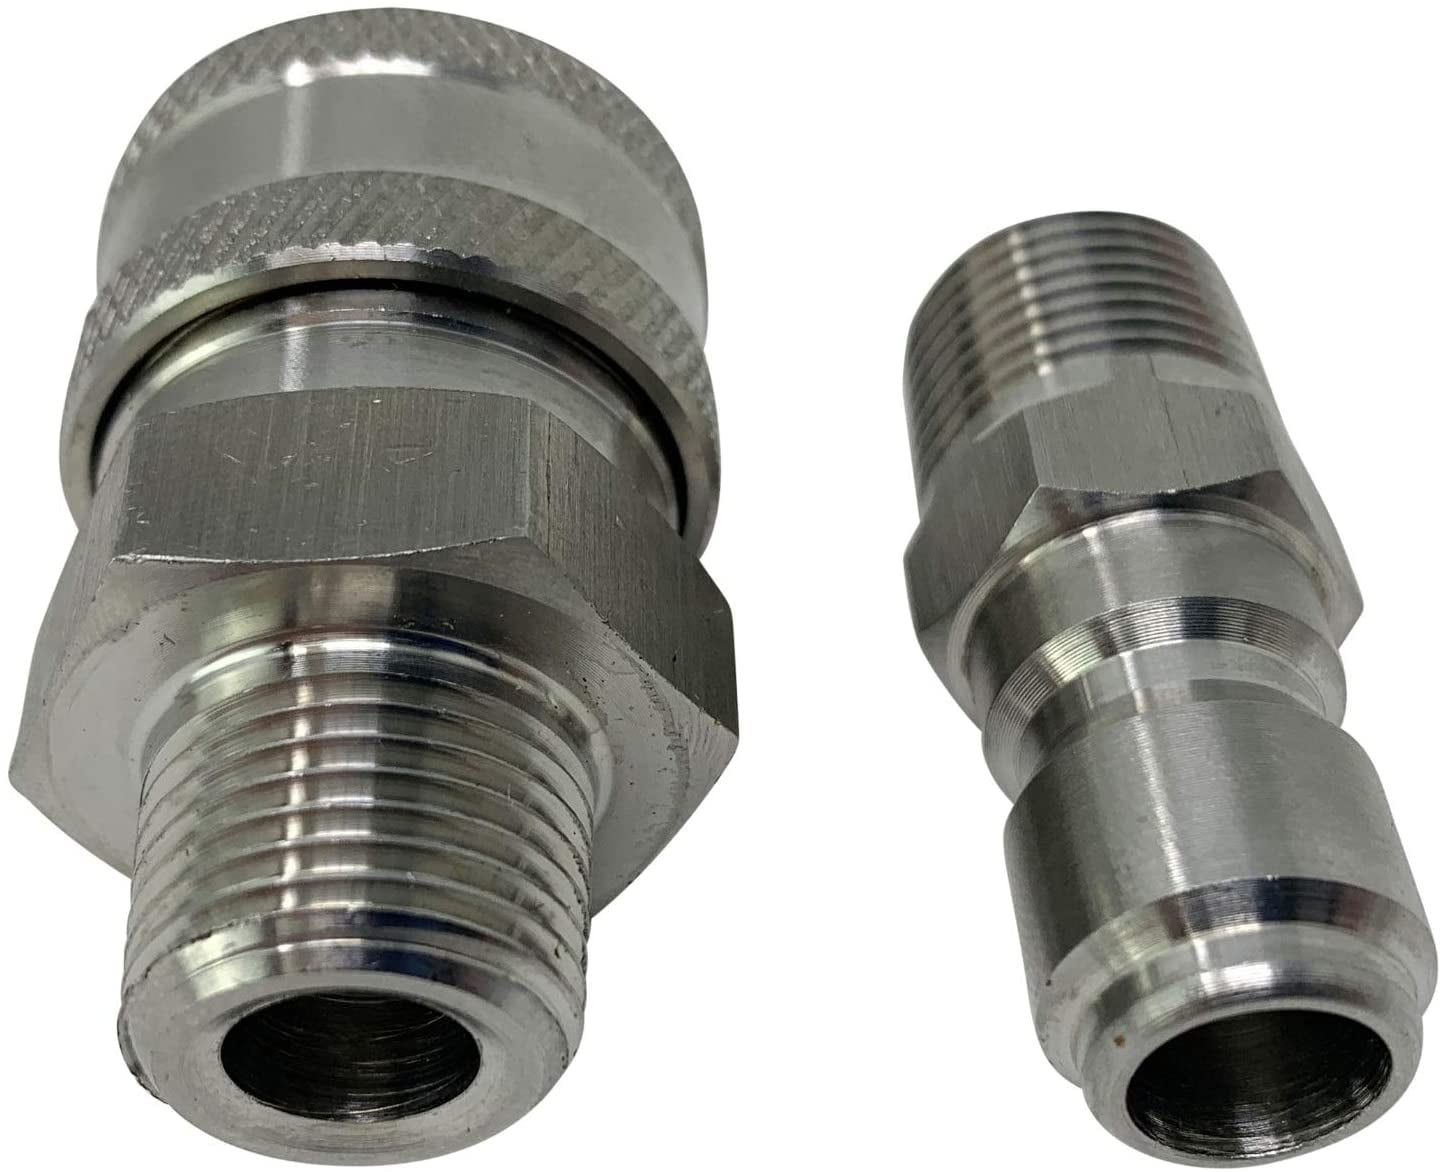 Details about   3pcs/set Stainless Steel 3/8 Quick Disconnect NPT Pressure Washer Adapters  #Z